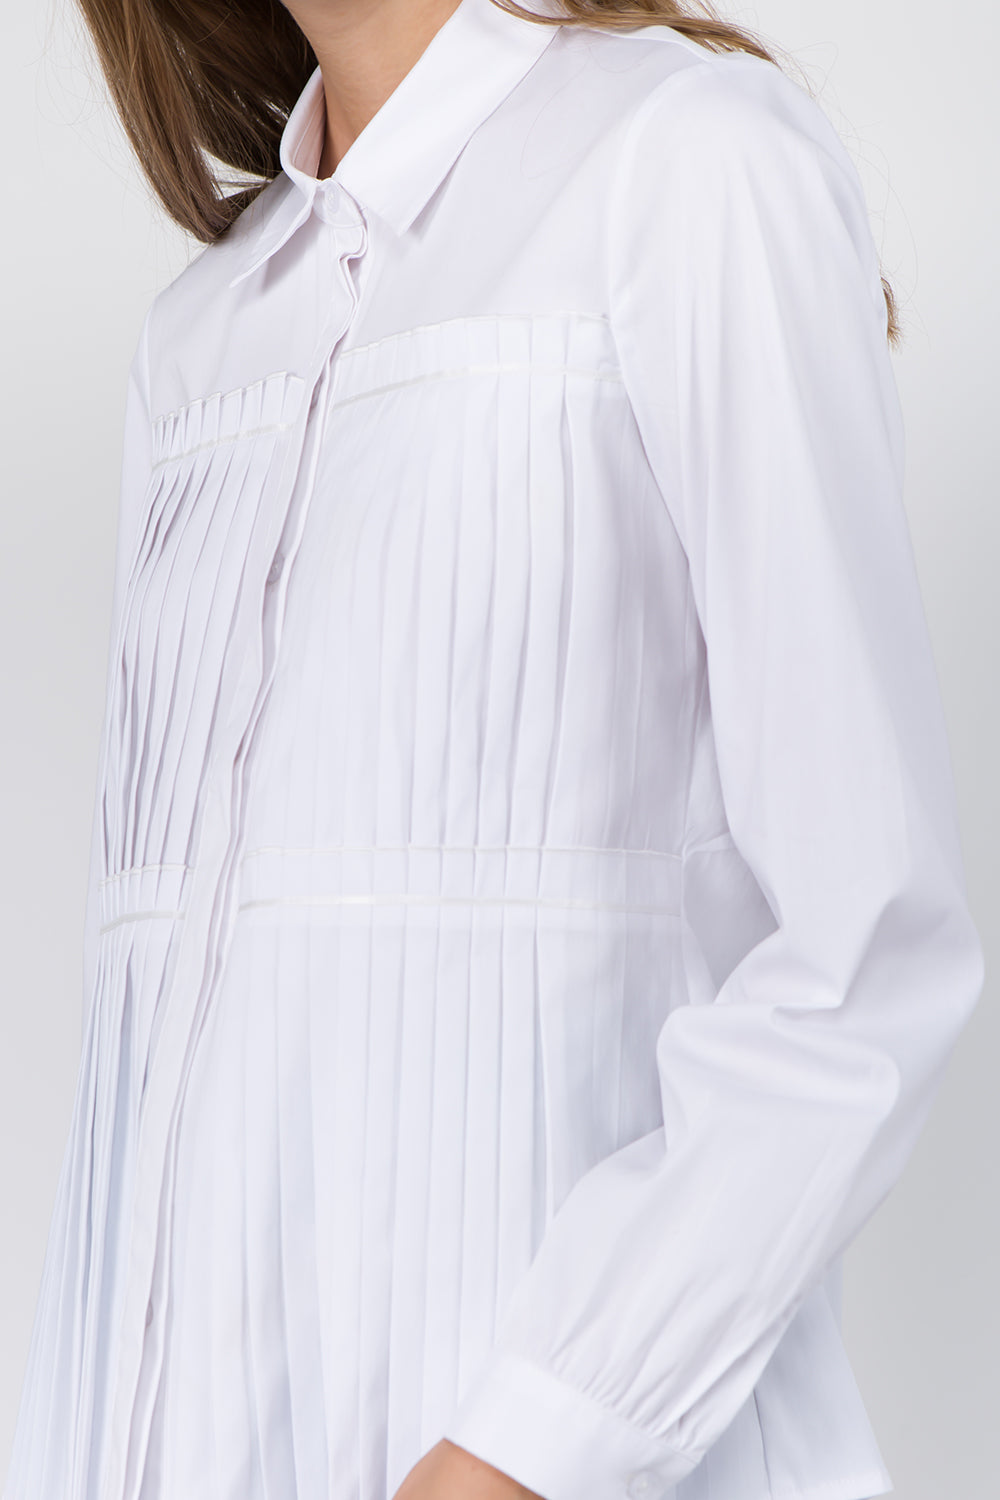 Pleat Detailed Button Up Blouse - Whiteroom+Cactus